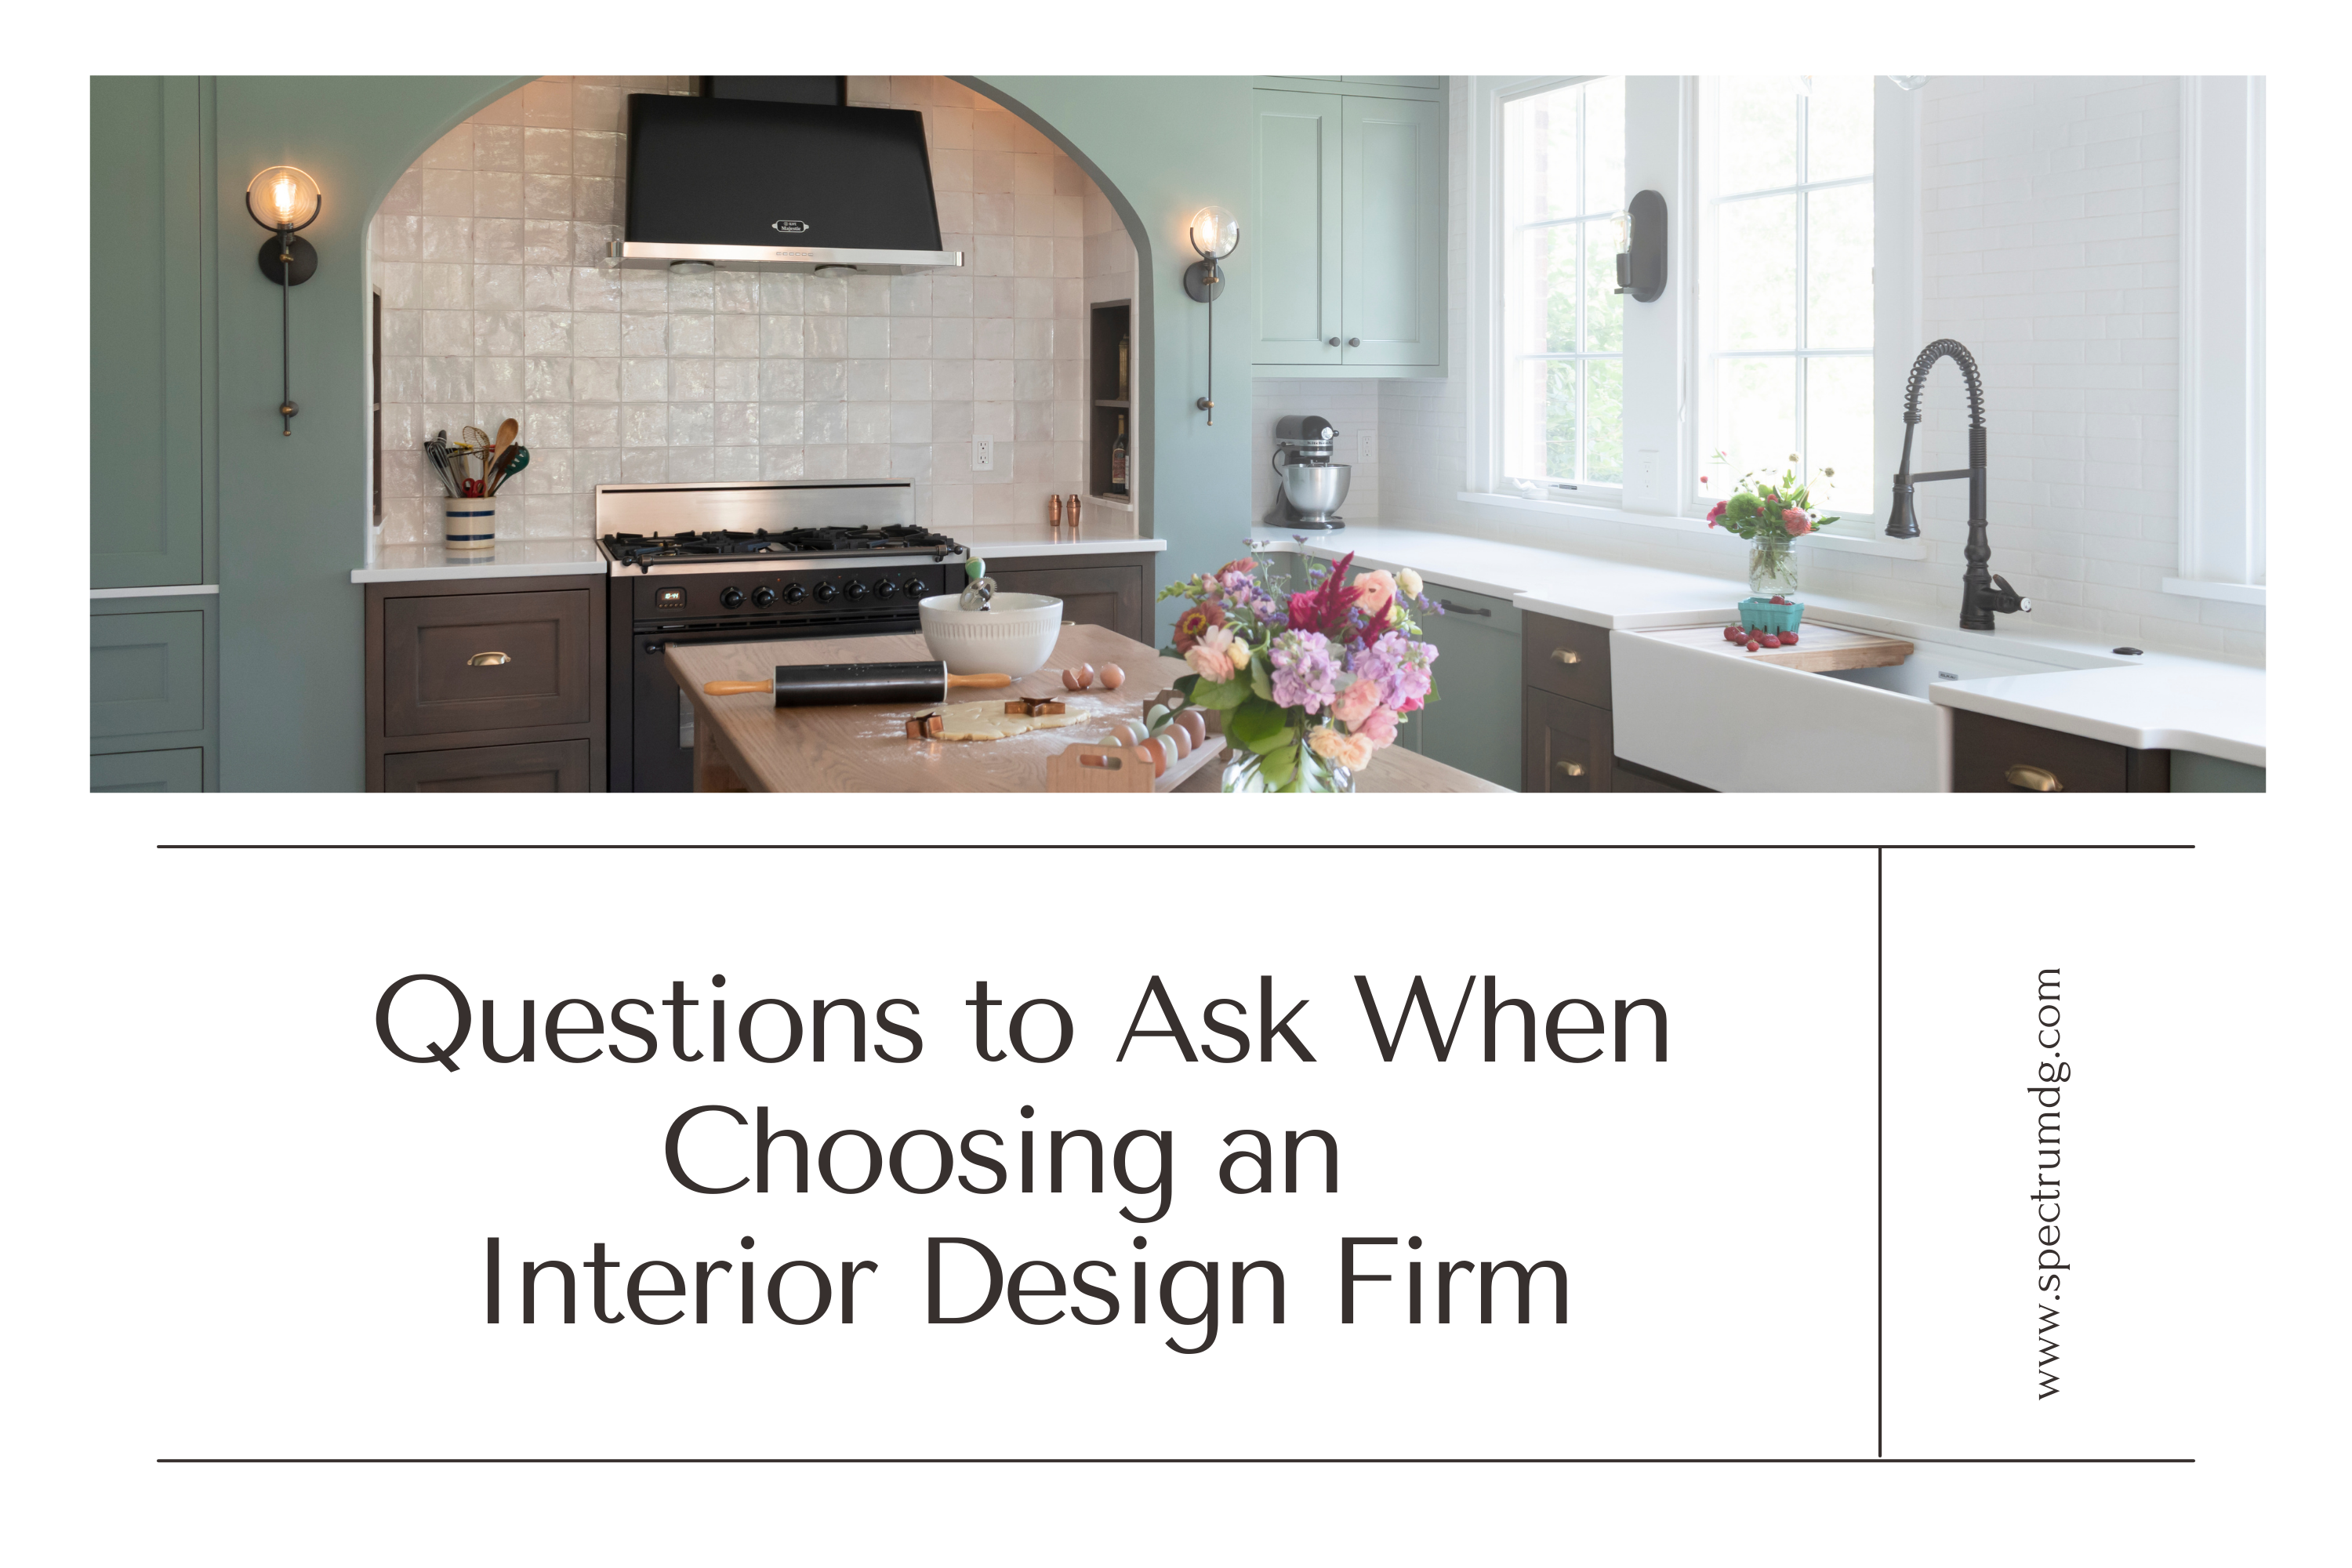 Questions to Ask When Choosing an Interior Design Firm